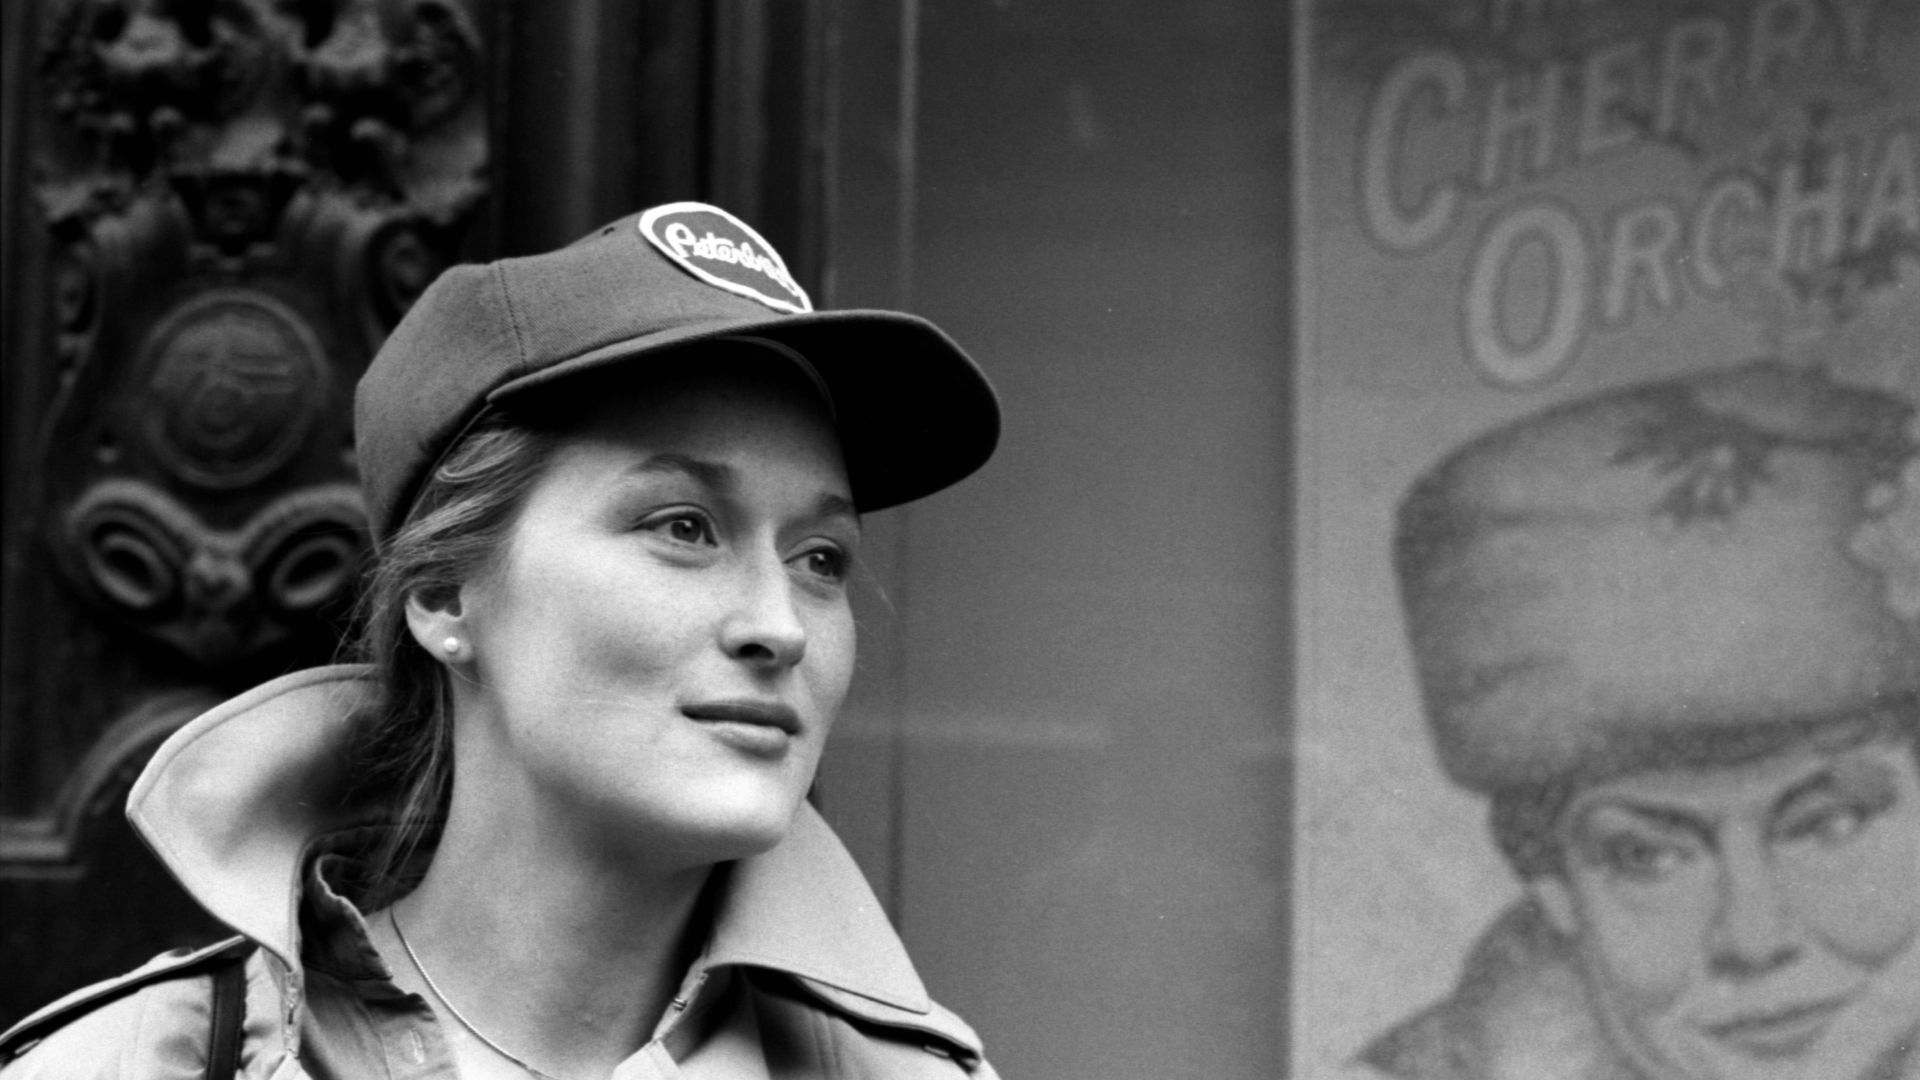 Young Meryl Streep Smiling, Wearing A Cap